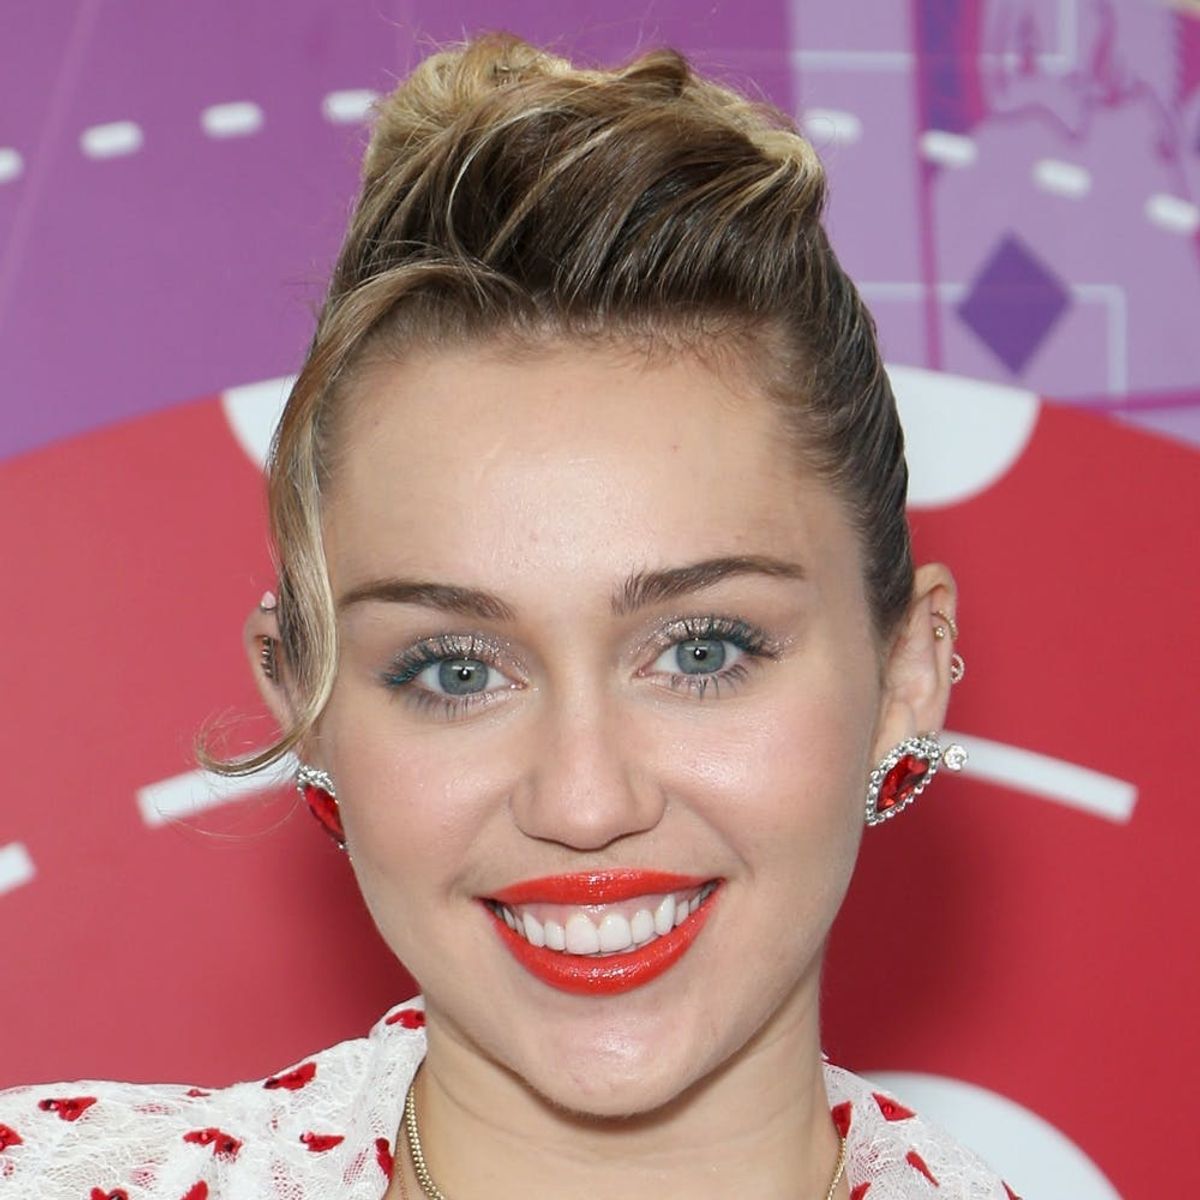 Miley Cyrus Says Years Starring As “Hannah Montana” Did “Extreme Damage” to her Psyche